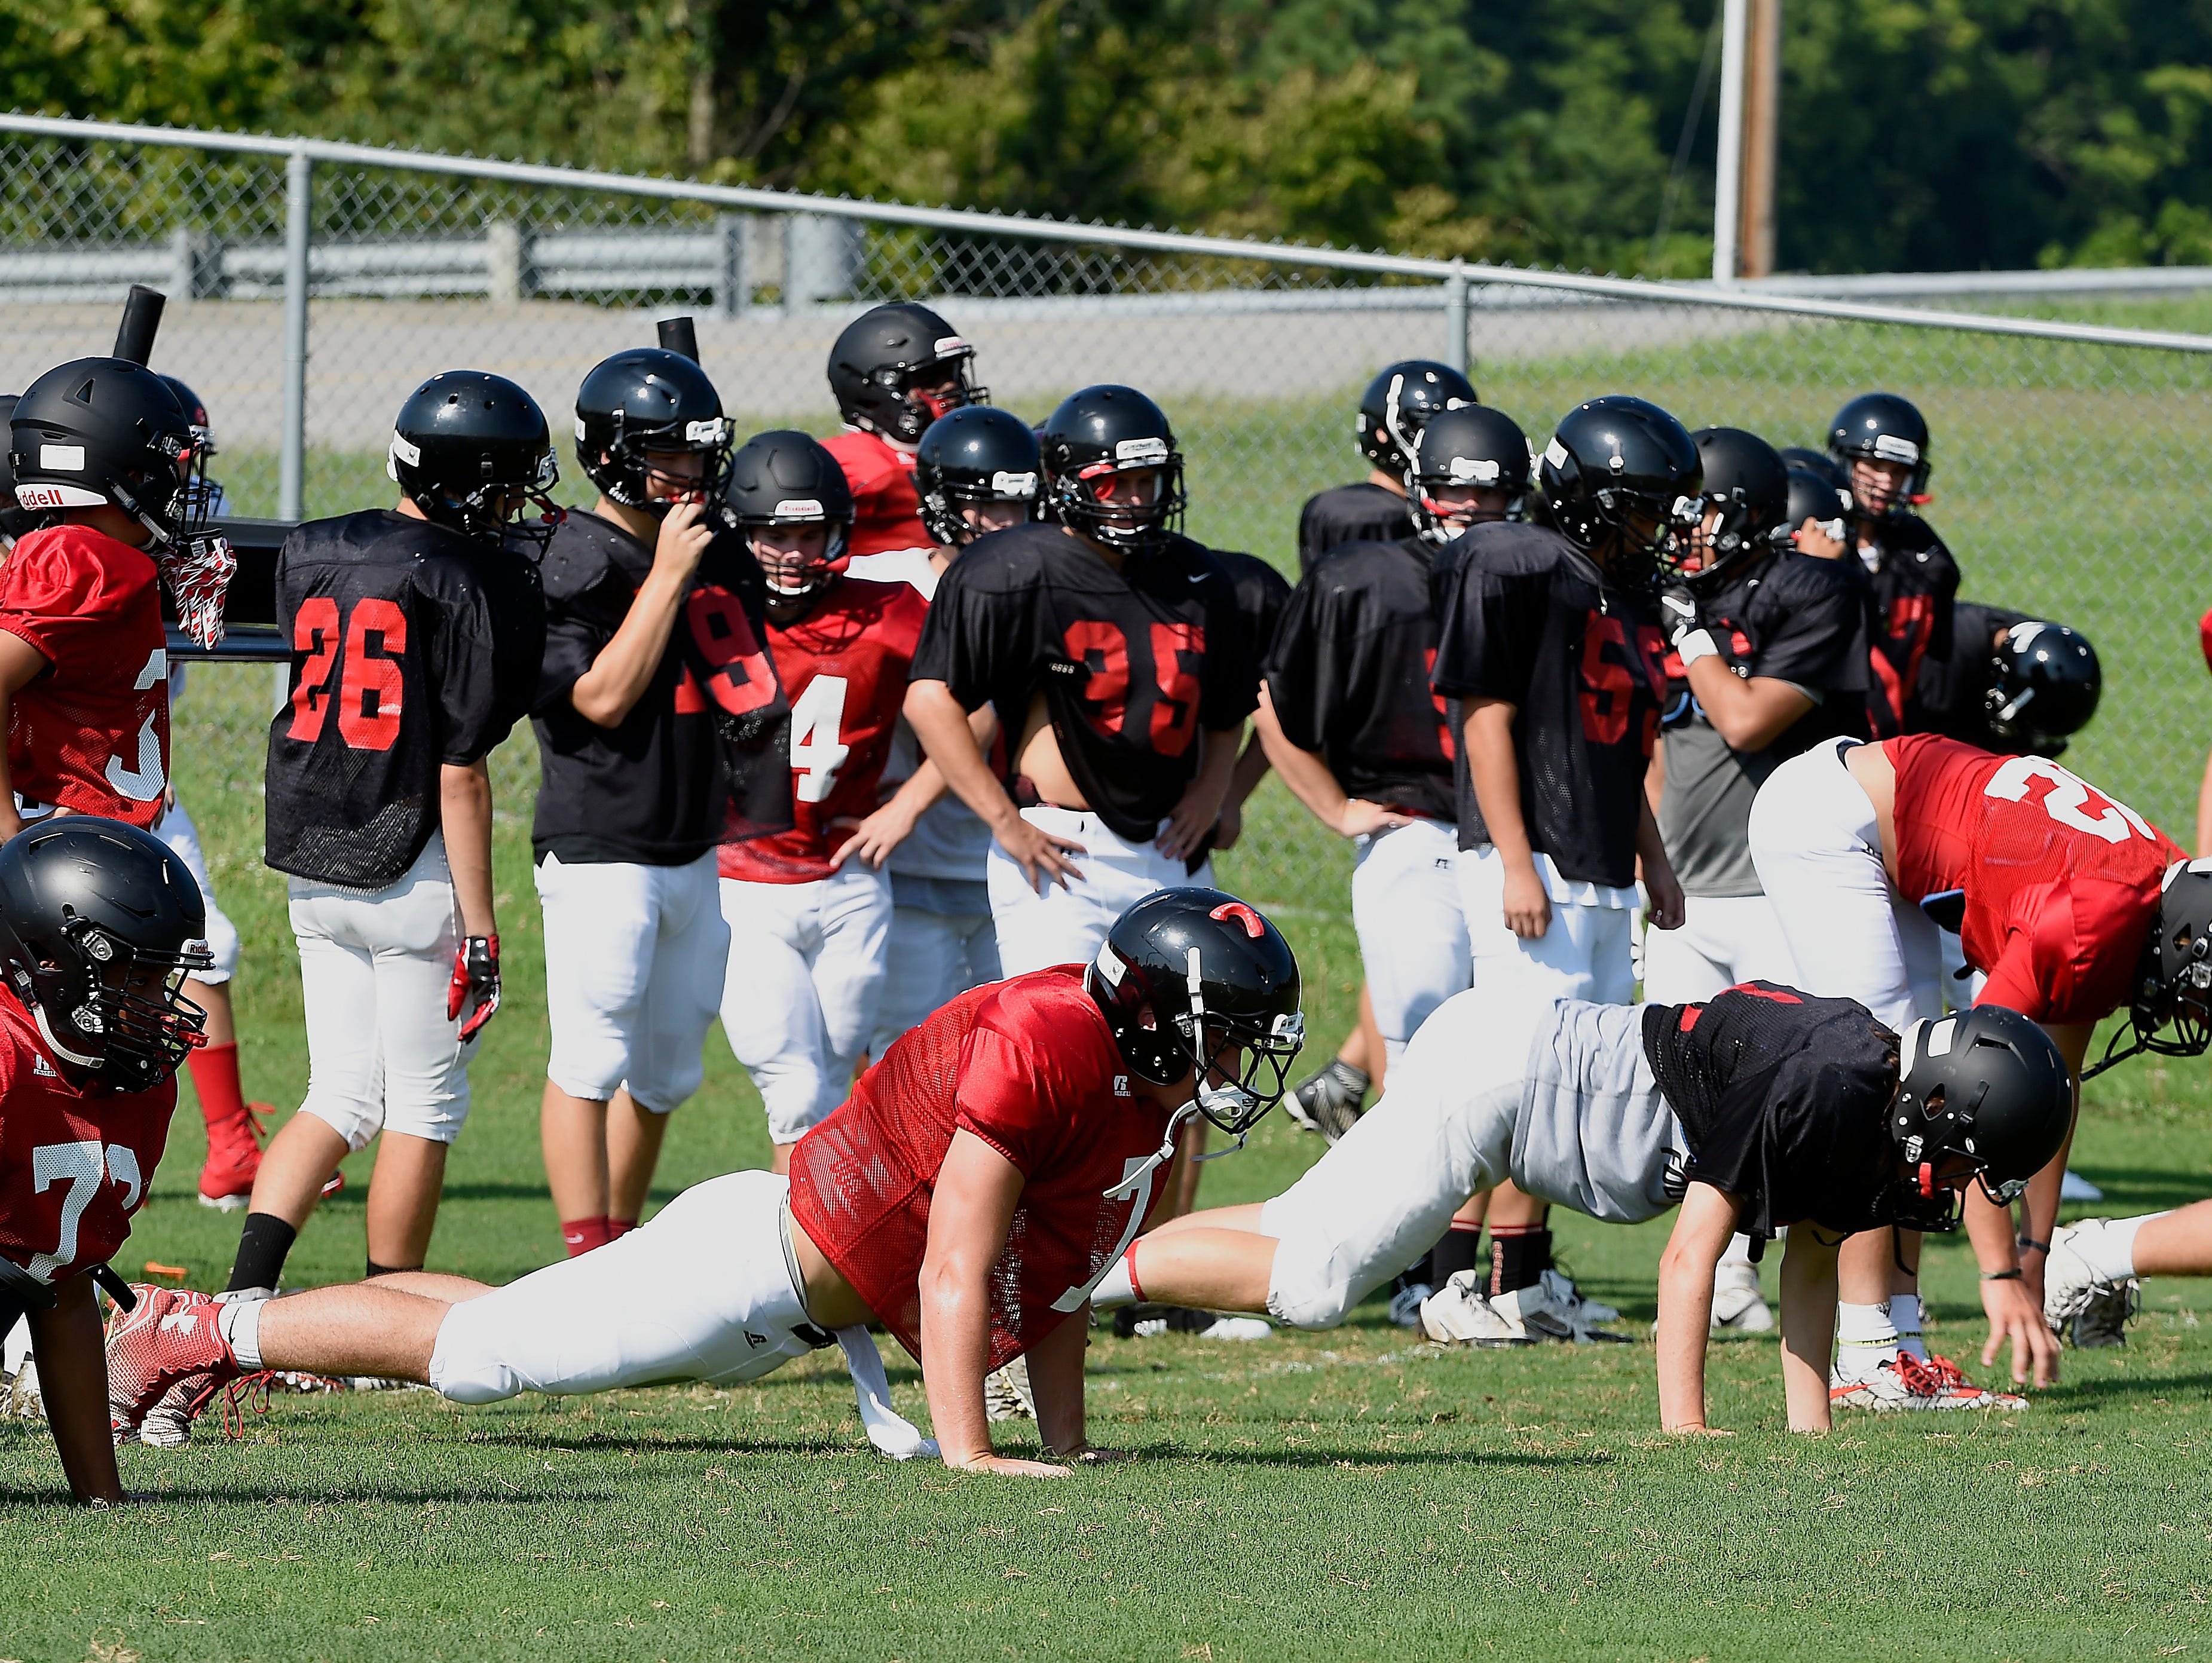 Ravenwood and other high school football teams across the state held their first practices in full pads on Monday.